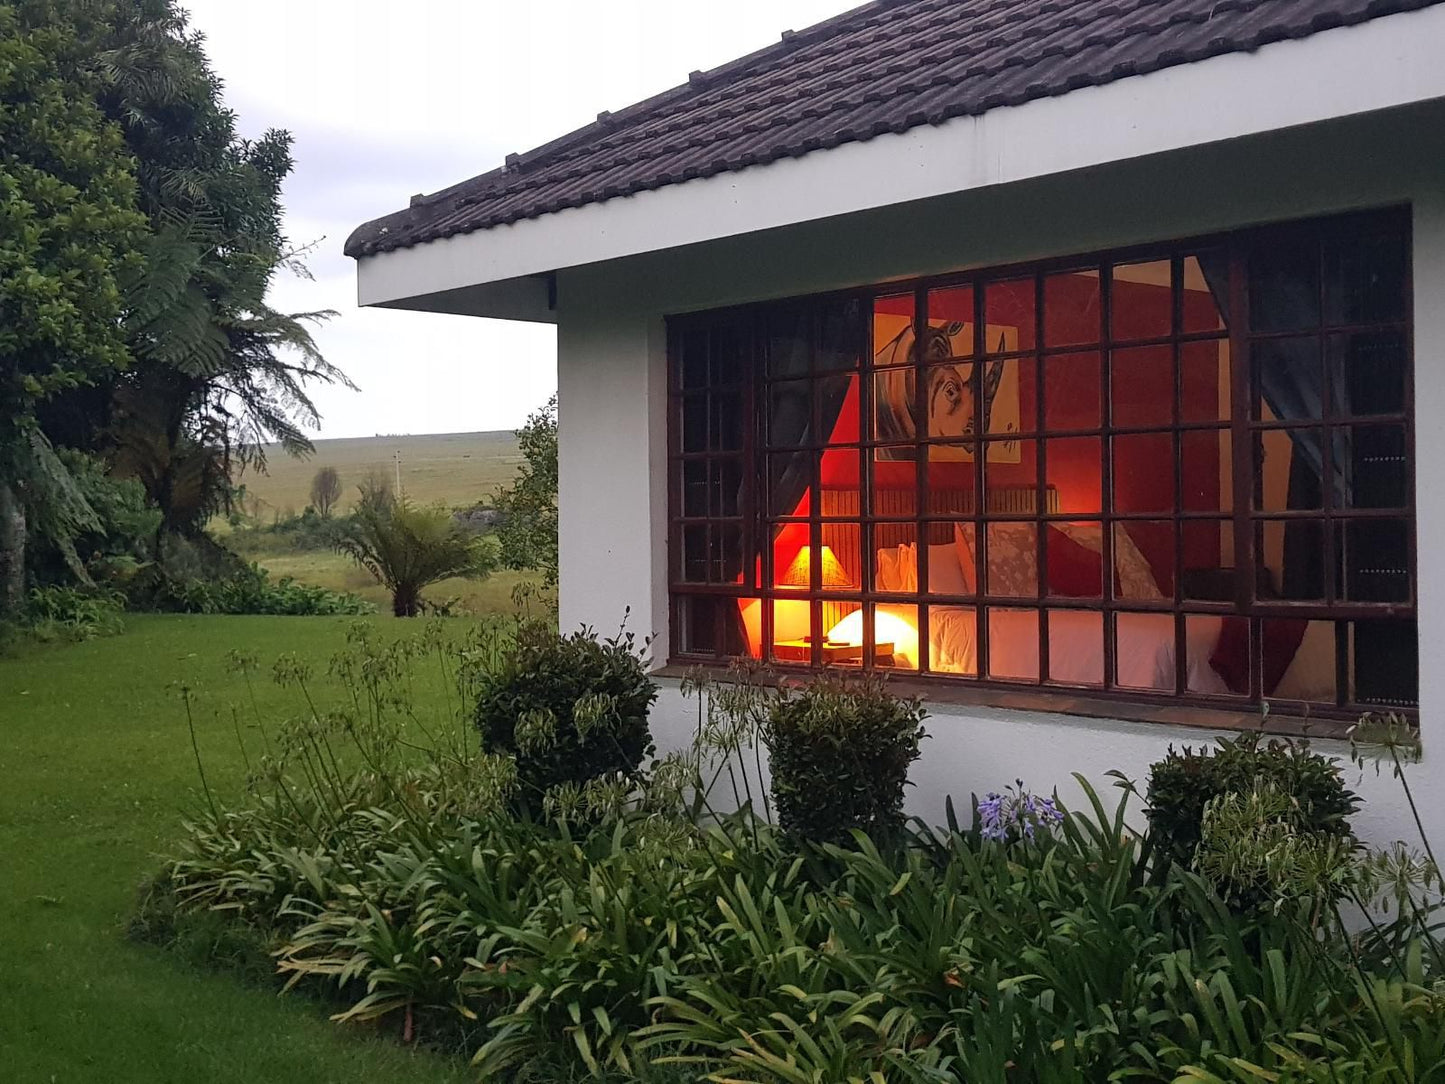 Paradise View Guesthouse Graskop Mpumalanga South Africa Fireplace, House, Building, Architecture